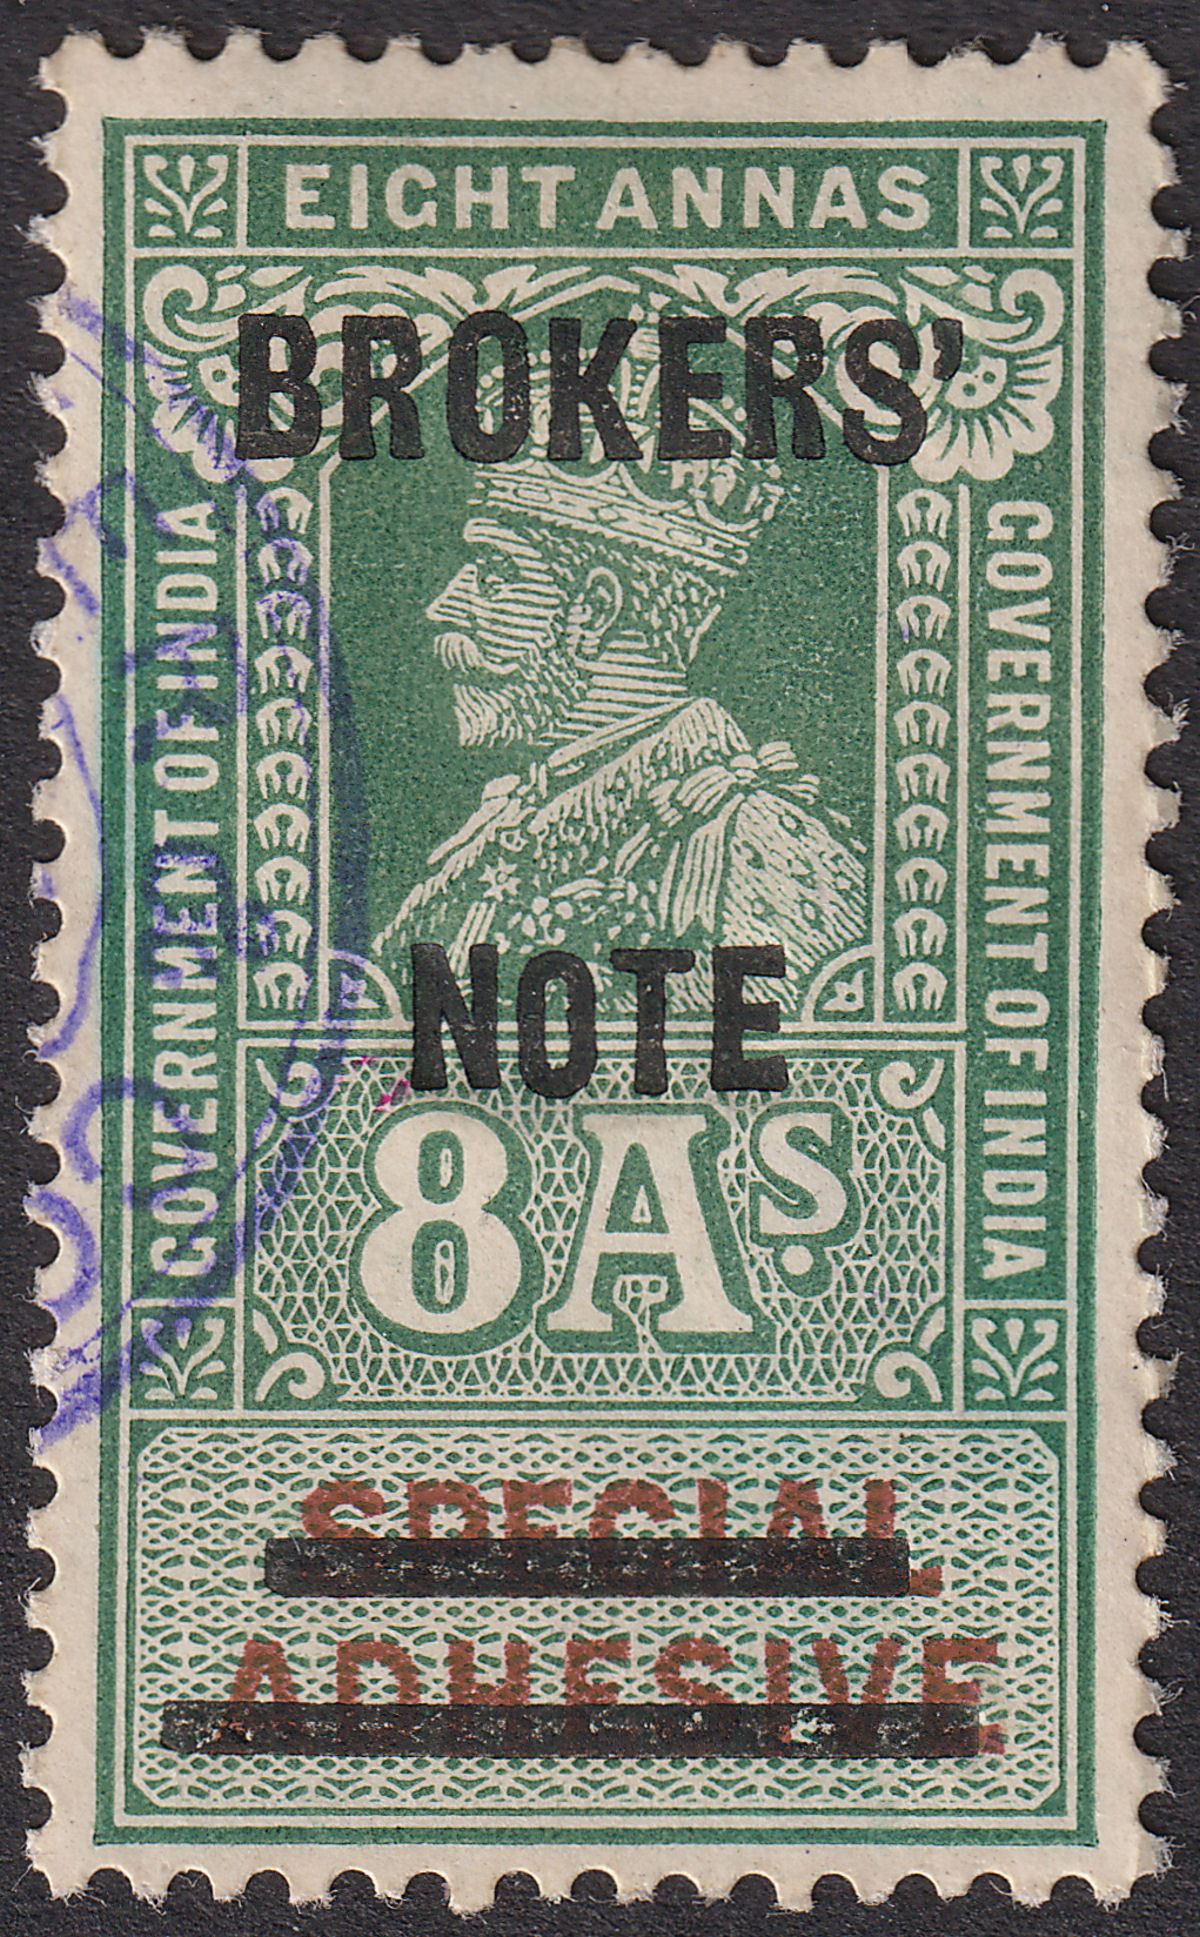 India 1912 KGV Revenue Brokers' Note Provisional Opt 8a Green + Brown Used BF8